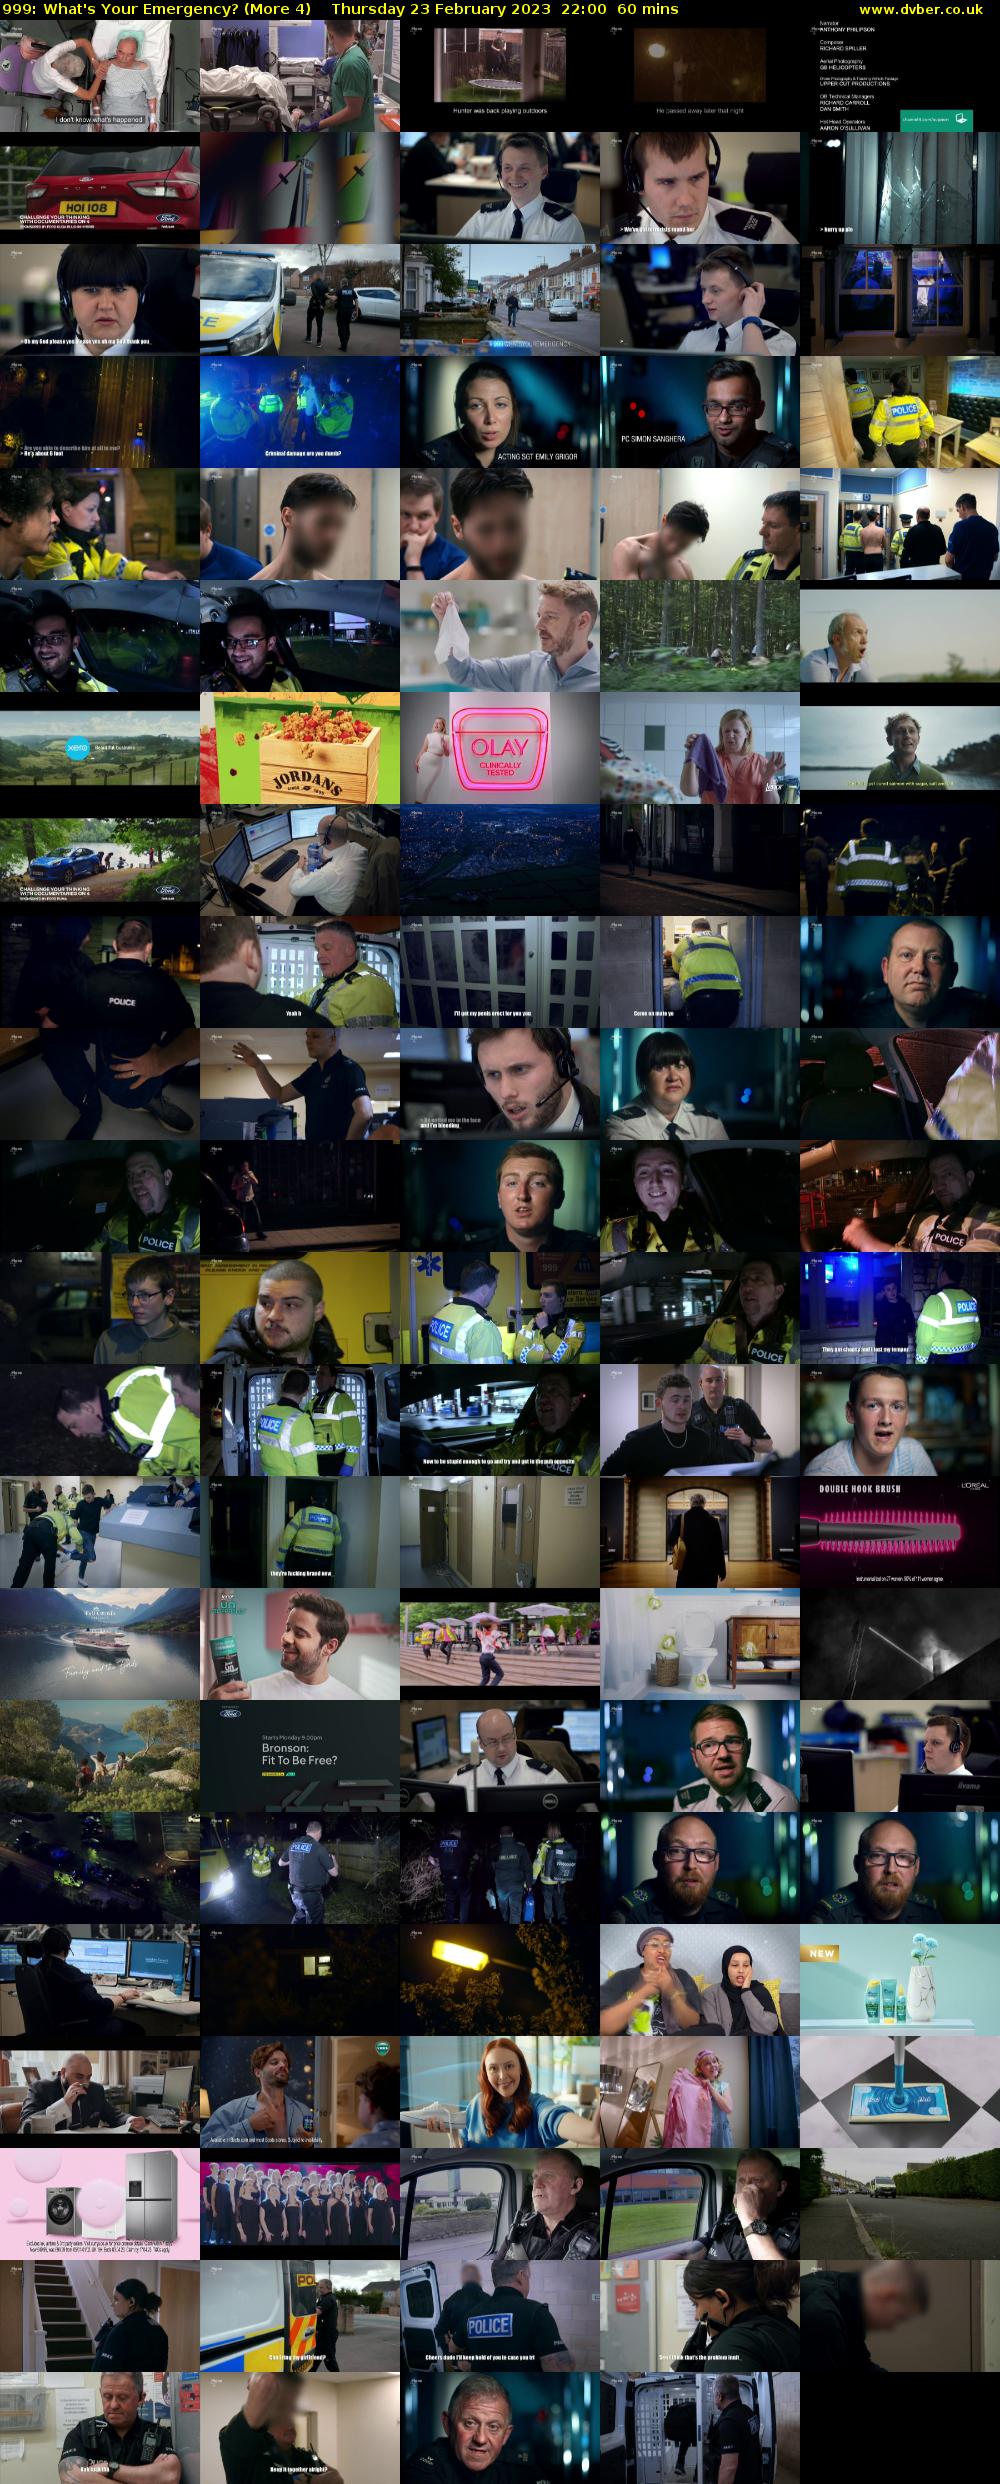 999: What's Your Emergency? (More 4) Thursday 23 February 2023 22:00 - 23:00